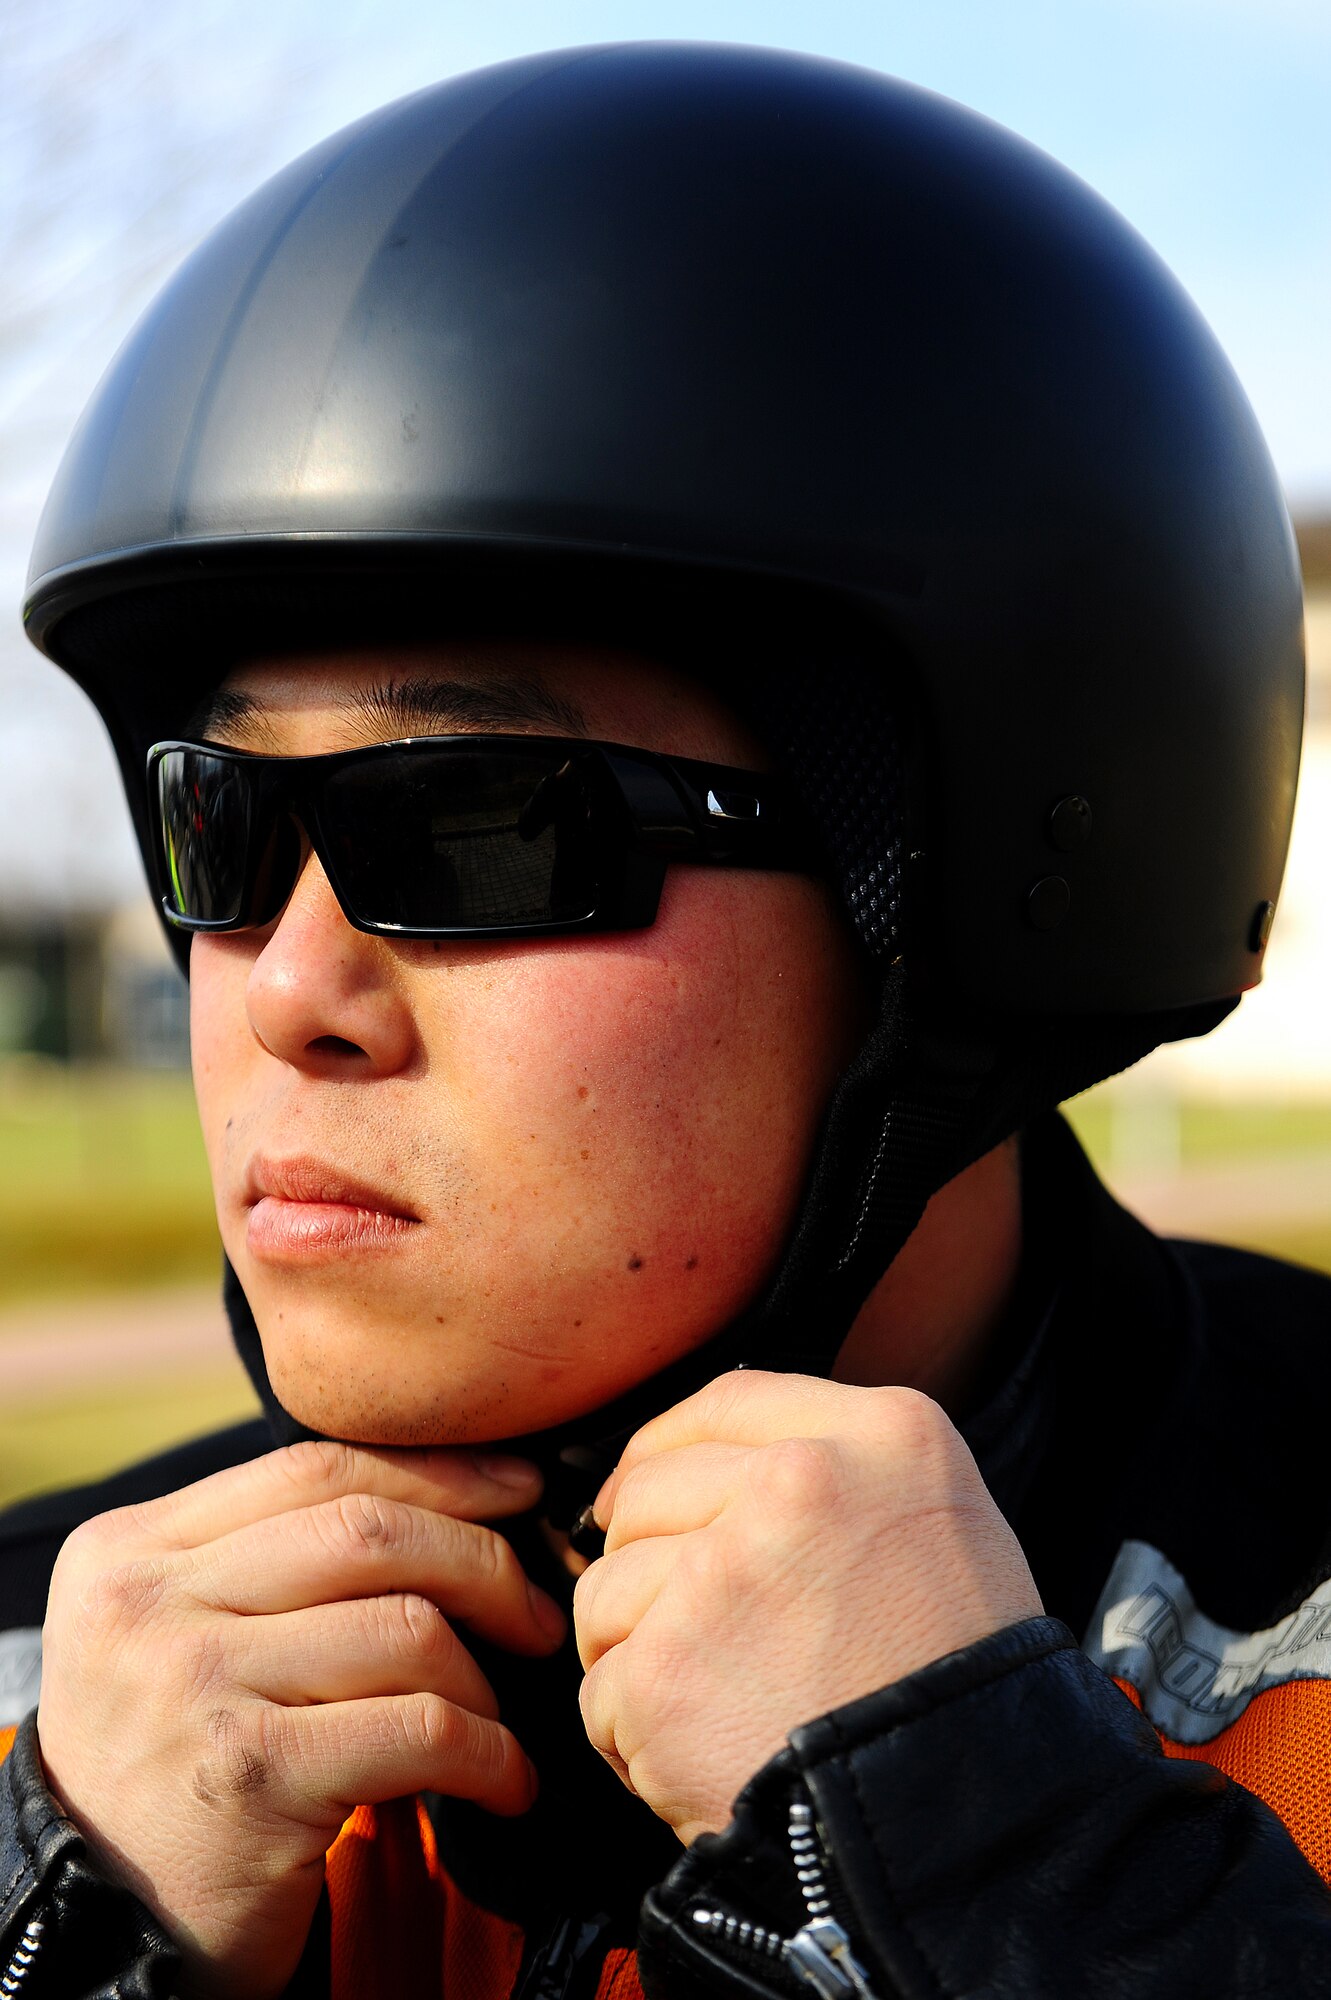 Air Force Master Sgt. Shannon Smith, 86th Aircraft Maintenance Squadron production superintendent, dons his helmet before a mentor ride during Motorcycle Safety Day, Ramstein Air Base, Germany, March 17, 2012. The safety day was held for the 86th Maintenance Group to promote safe motorcycle practices and raise camaraderie amongst the participants. (U.S. Air Force photo/Airman Brea Miller)